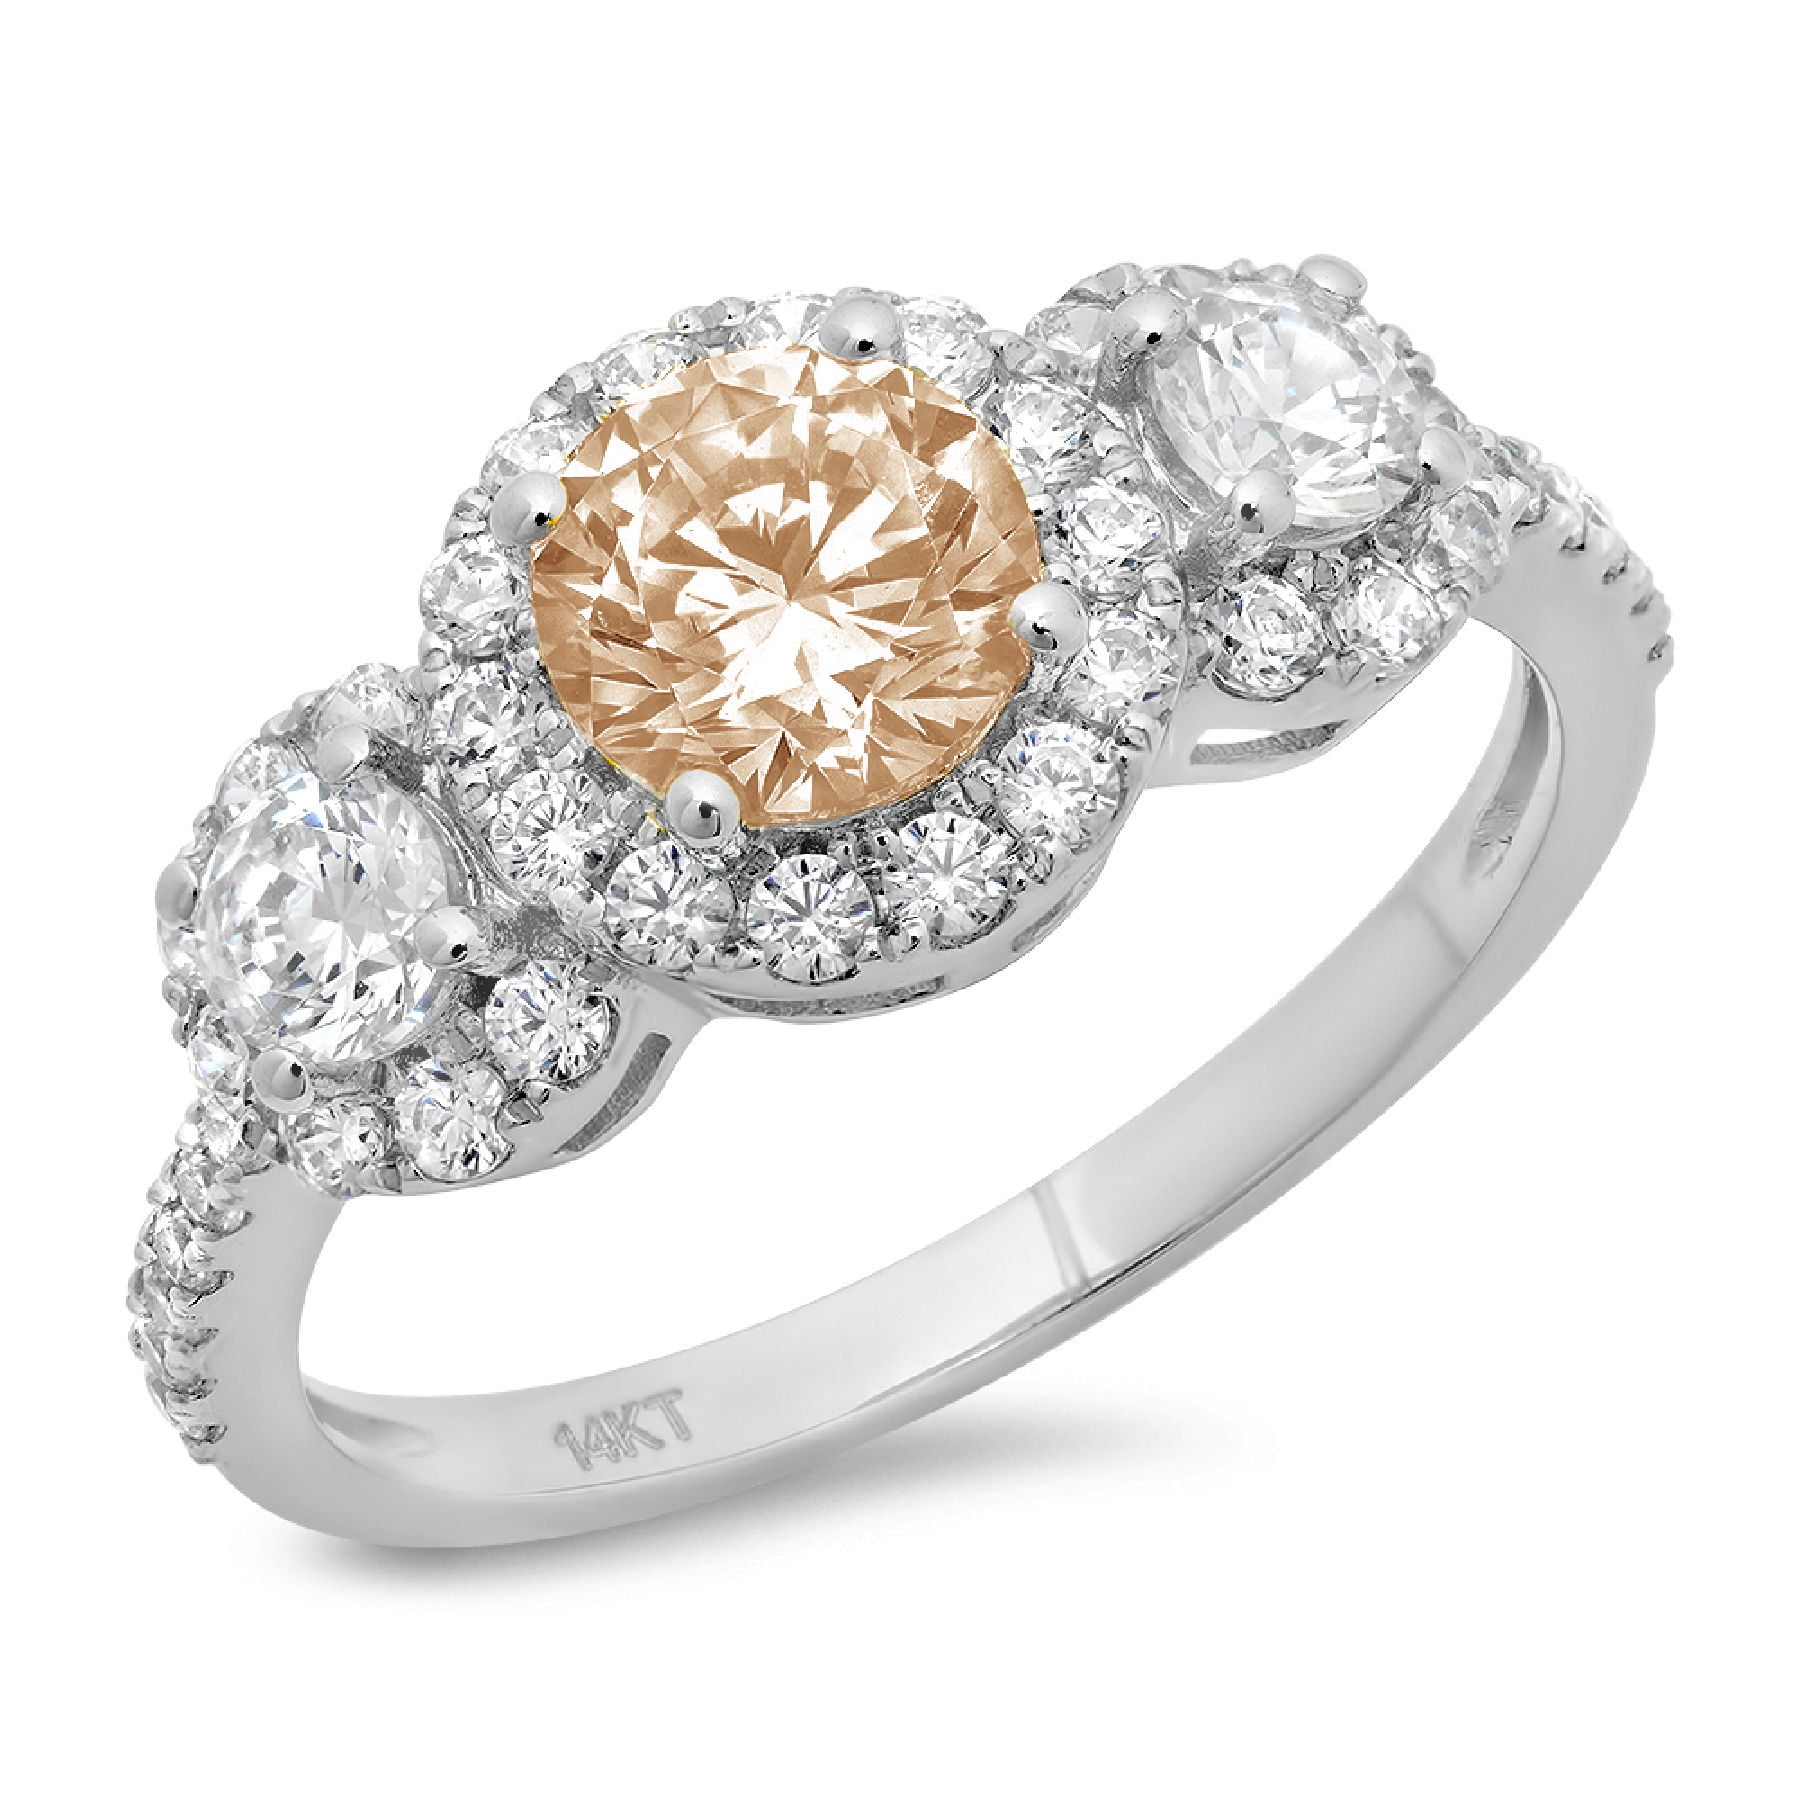 Details about   Ladies VVS1 Diamond 14K White Gold Finish Engagement And Wedding Bridal Ring 